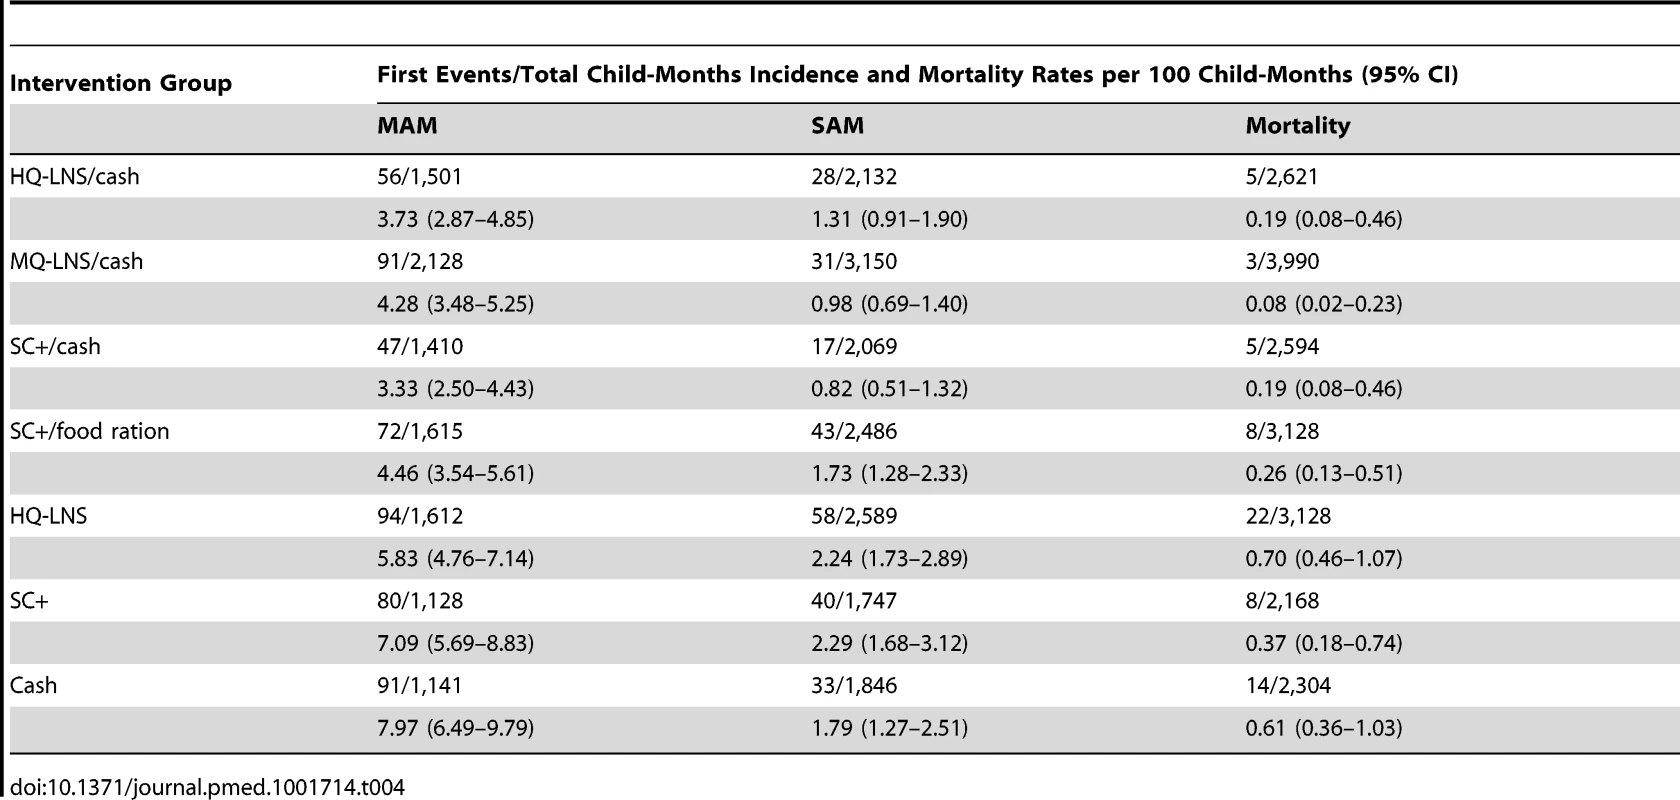 Incidence of moderate acute malnutrition and severe acute malnutrition and mortality in each intervention group, August–December 2011.